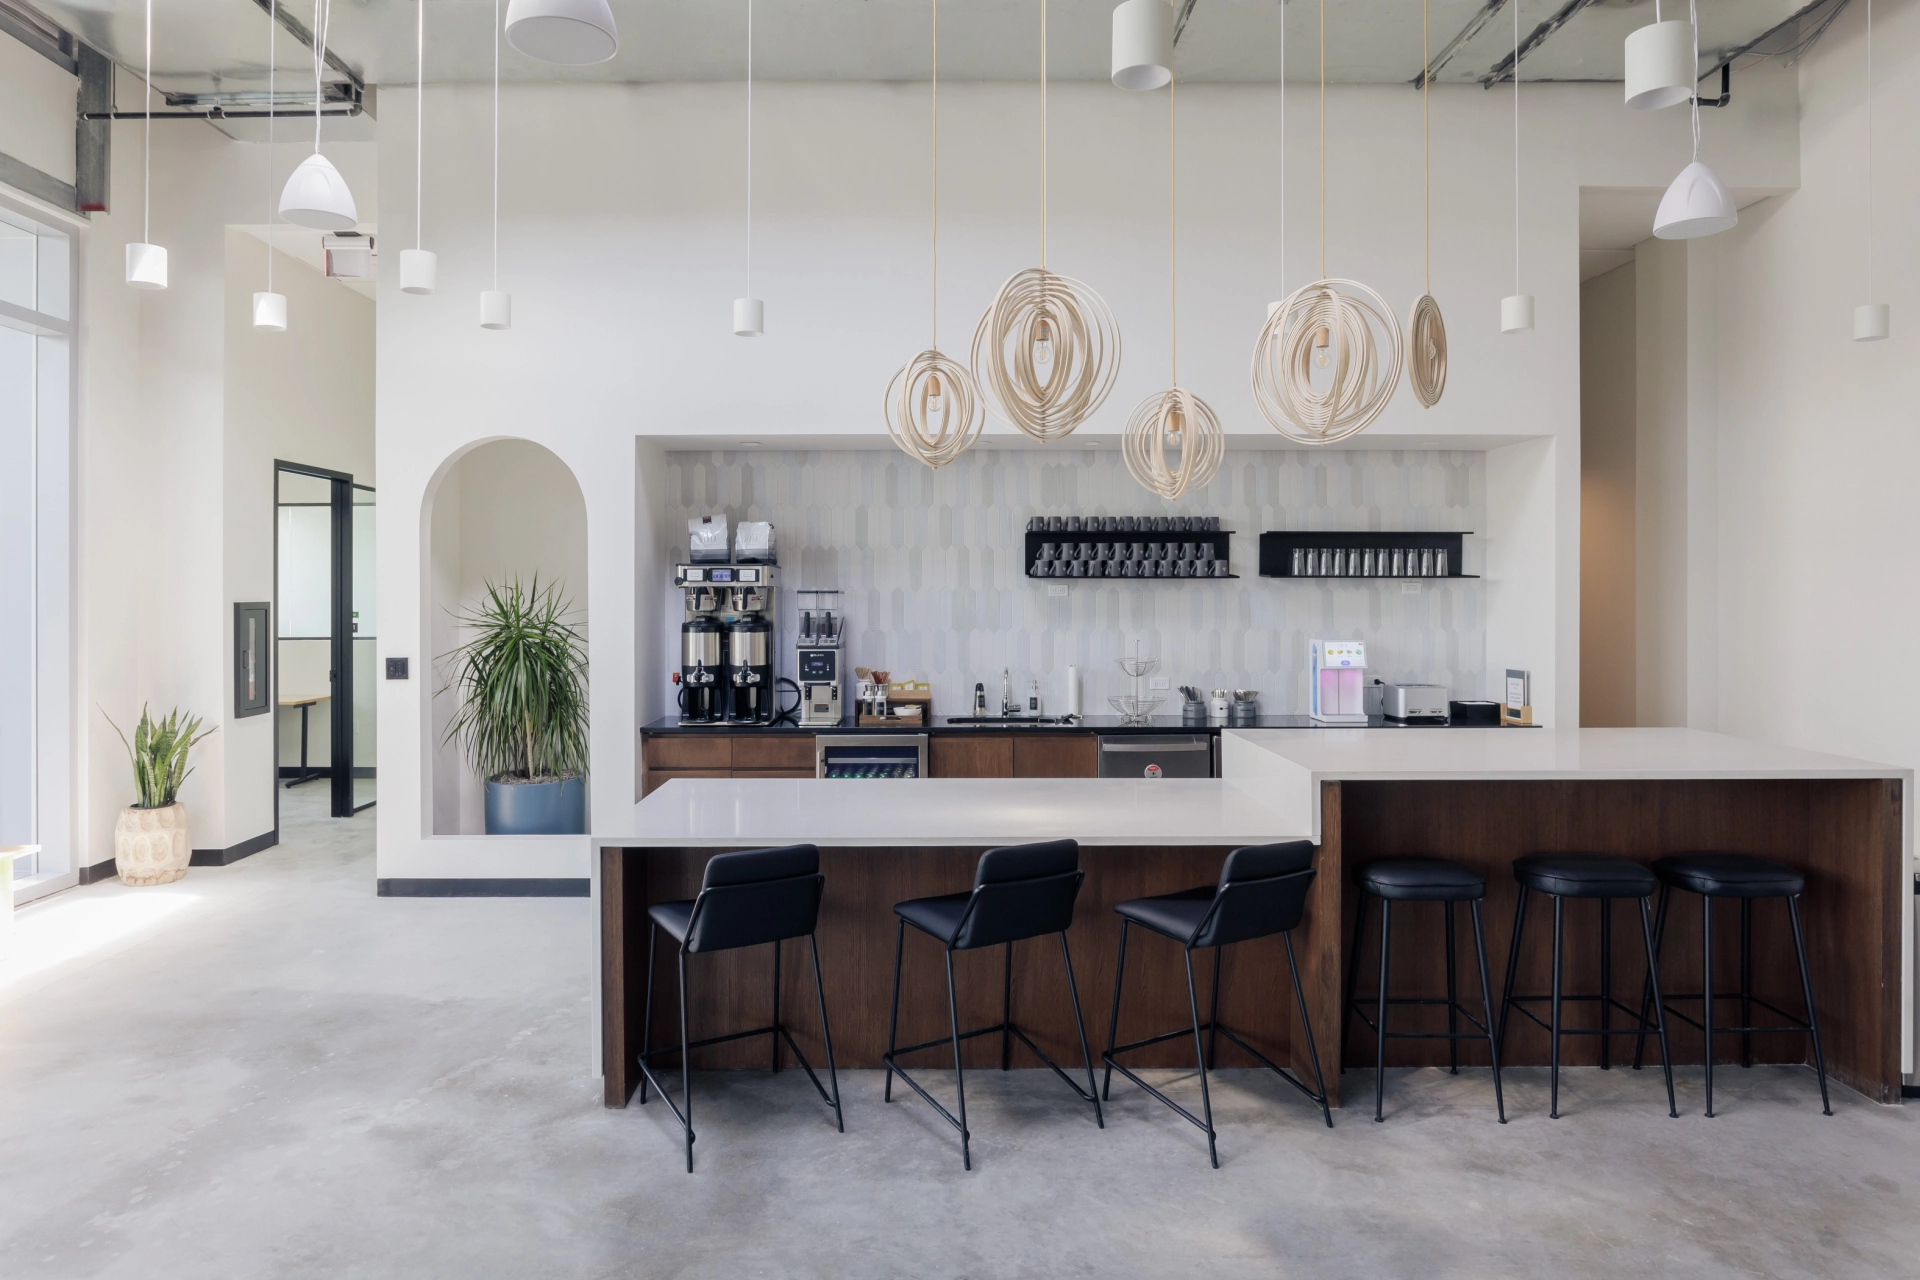 An open kitchen with stools serving as a workspace and a bar.